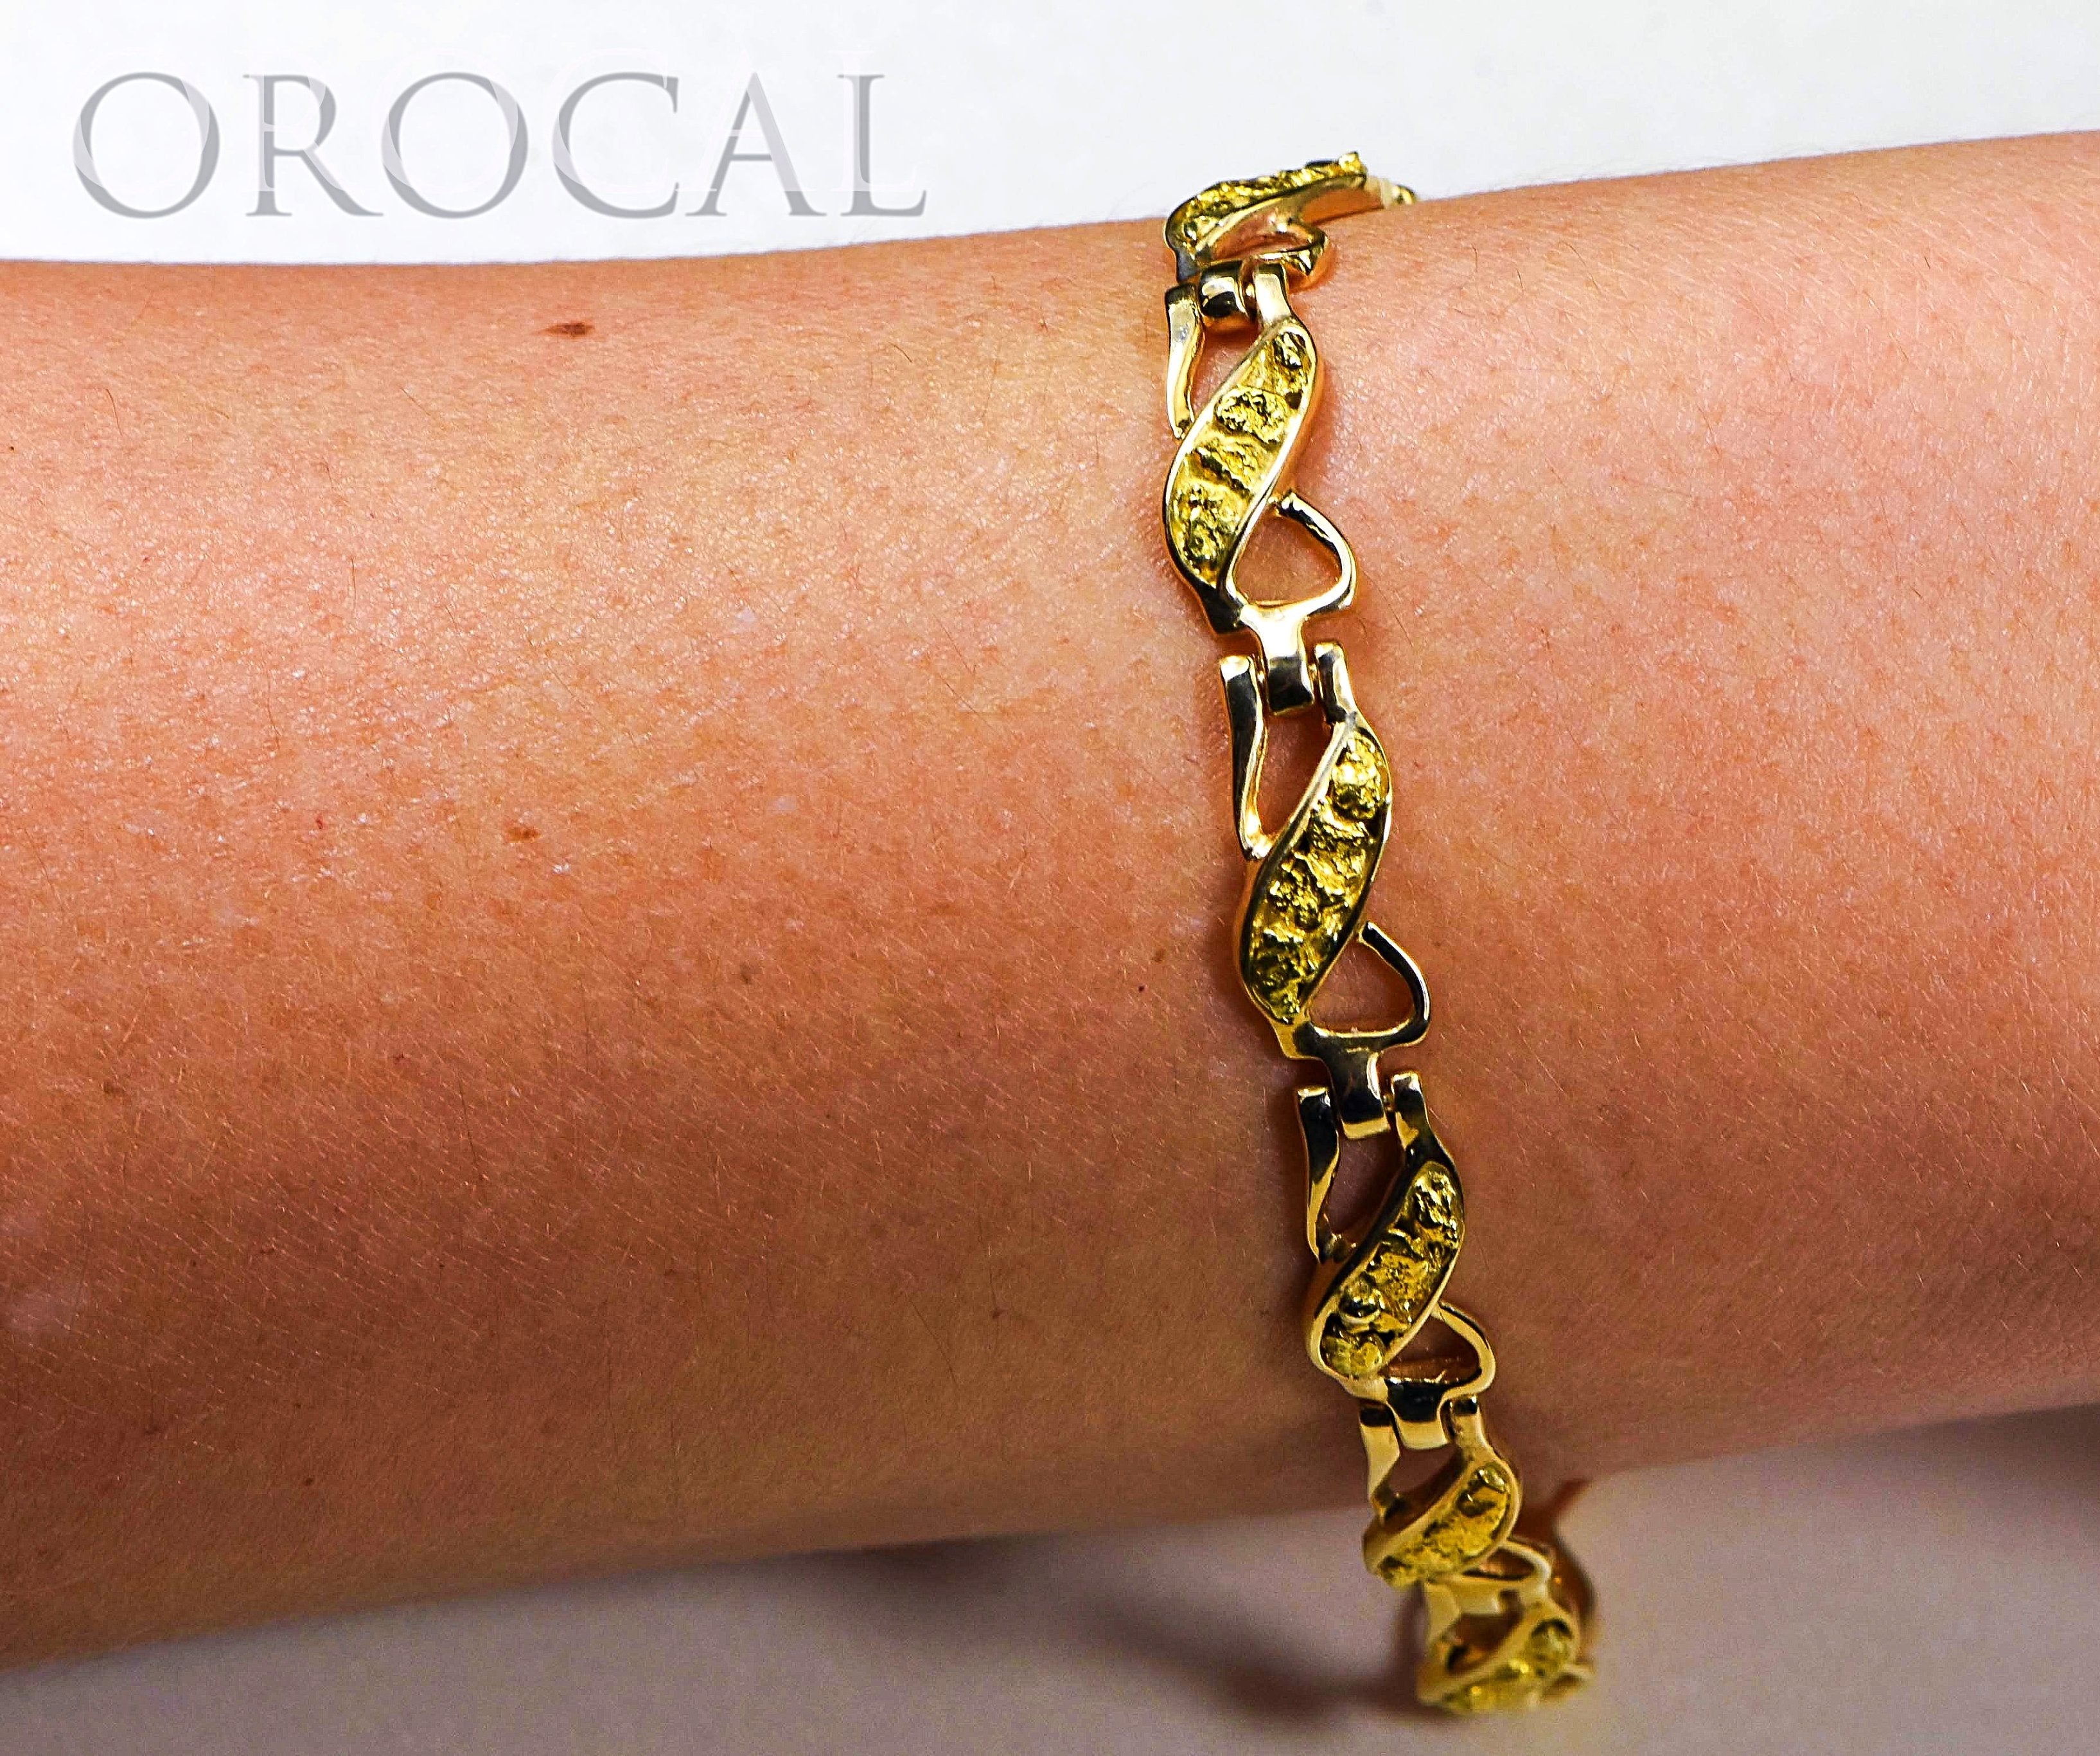 Gold Nugget Bracelet "Orocal" BWB40N9L Genuine Hand Crafted Jewelry - 14K Gold Casting